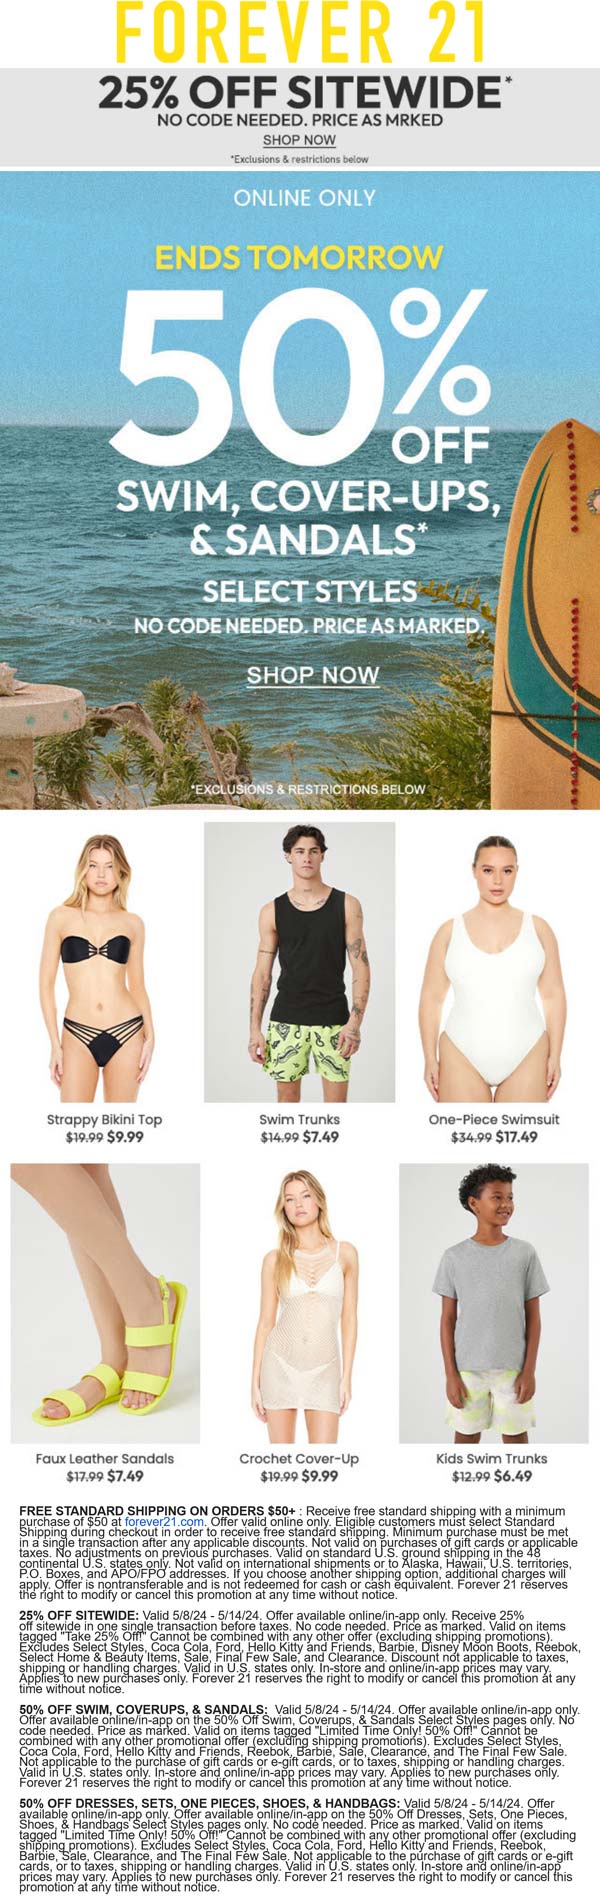 Forever 21 stores Coupon  50% off swim & more online at Forever 21 #forever21 